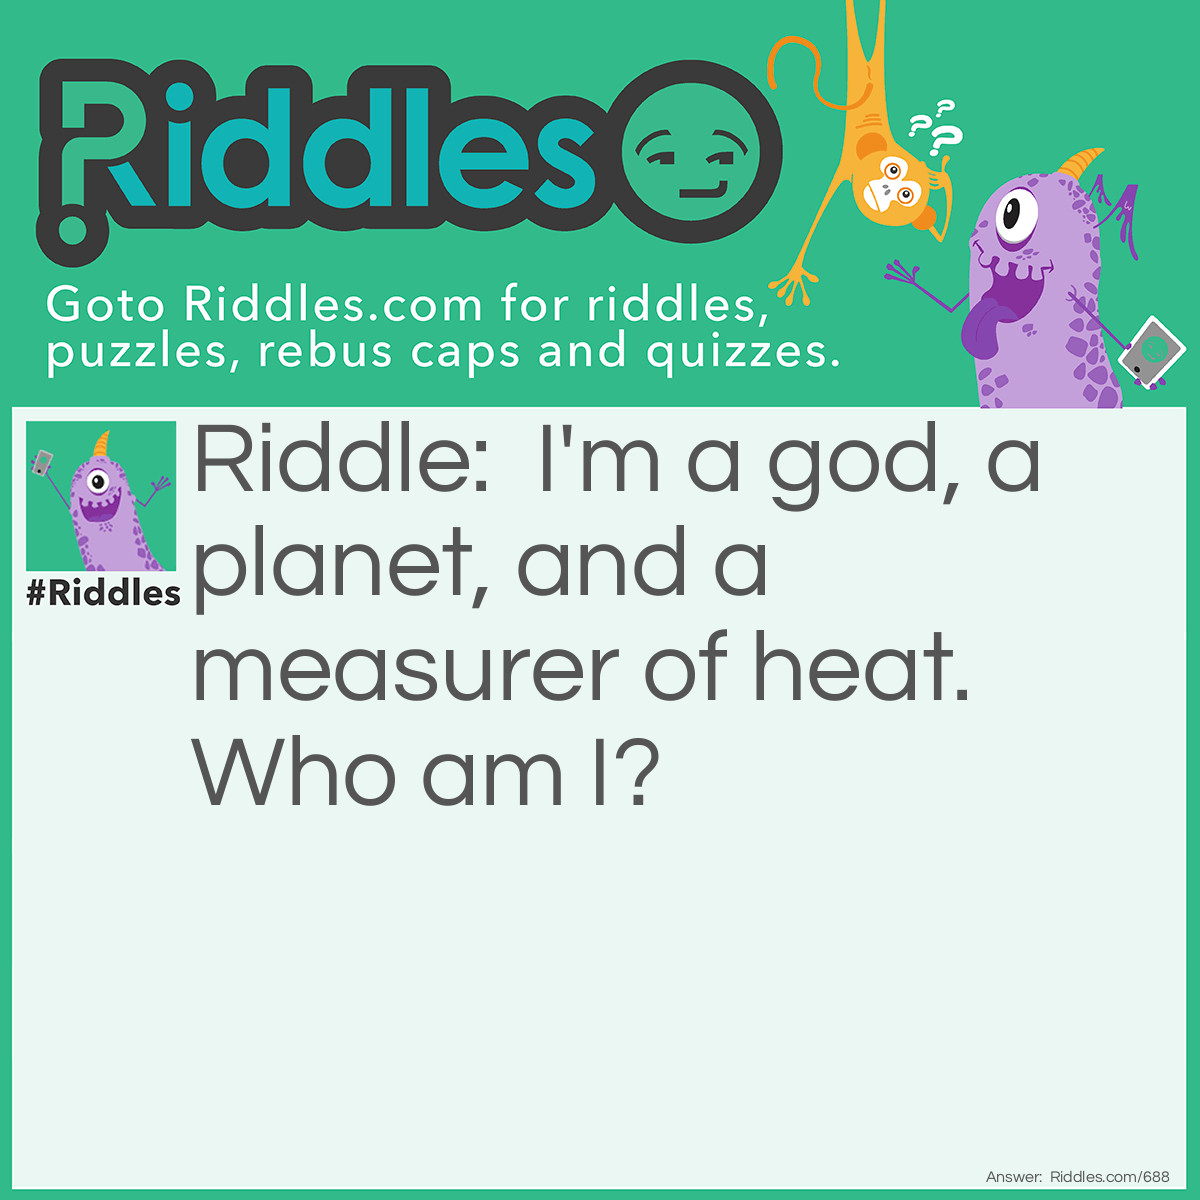 Riddle: I'm a god, a planet, and a measurer of heat.
<a href="https://www.riddles.com/who-am-i-riddles">Who am I</a>? Answer: Mercury.